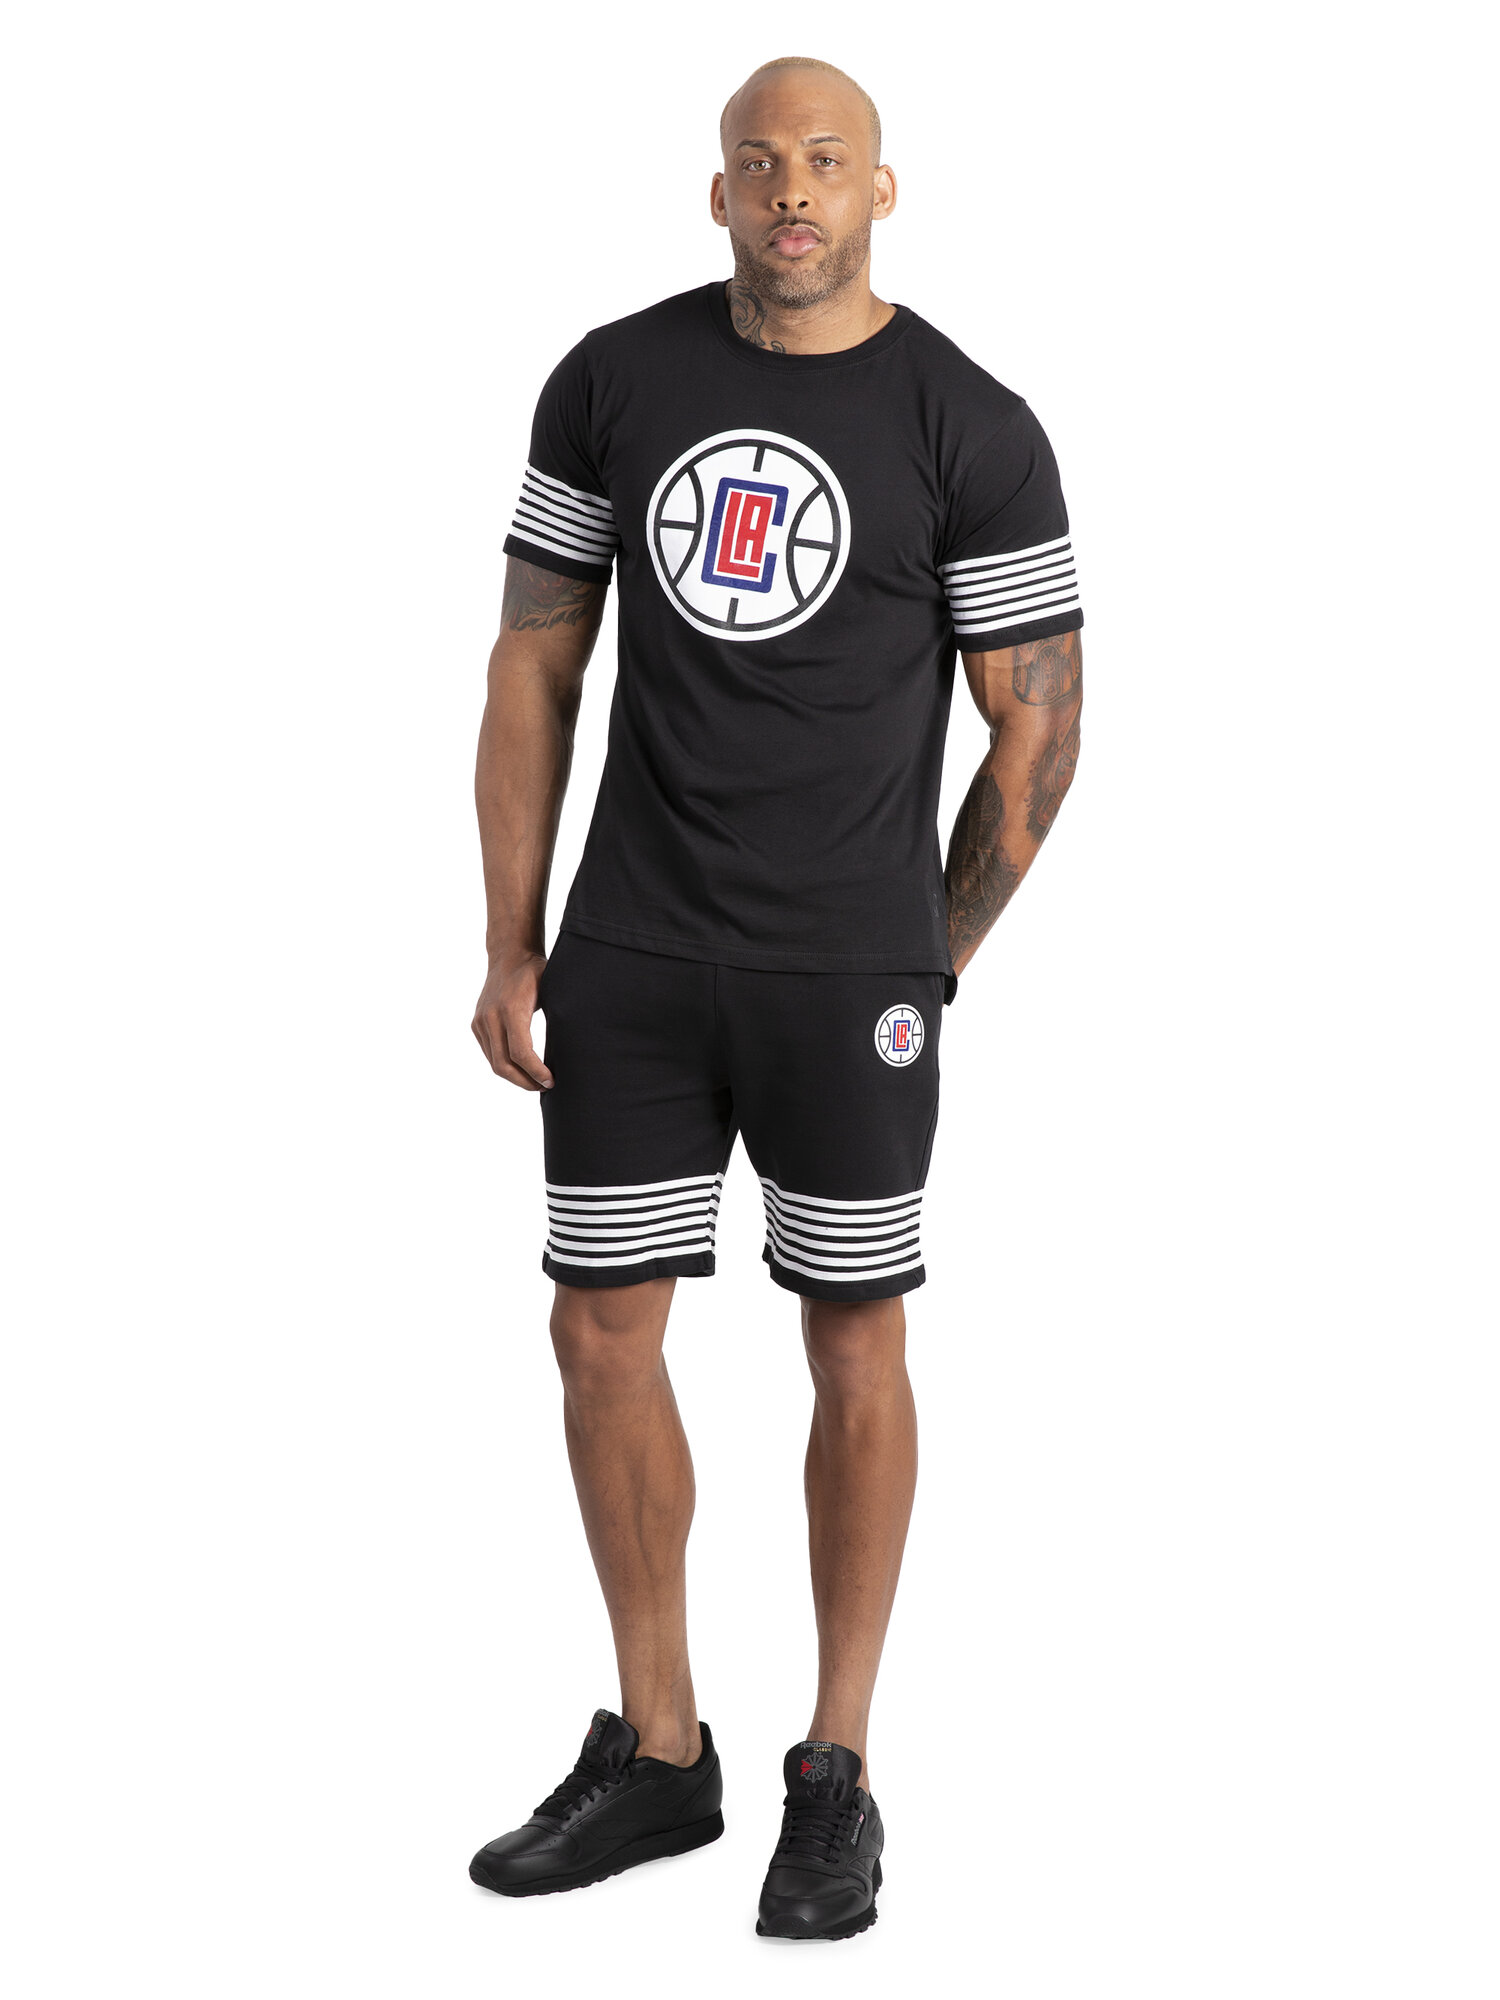 Shirts & Tops, La Clippers Jersey Youth Size M